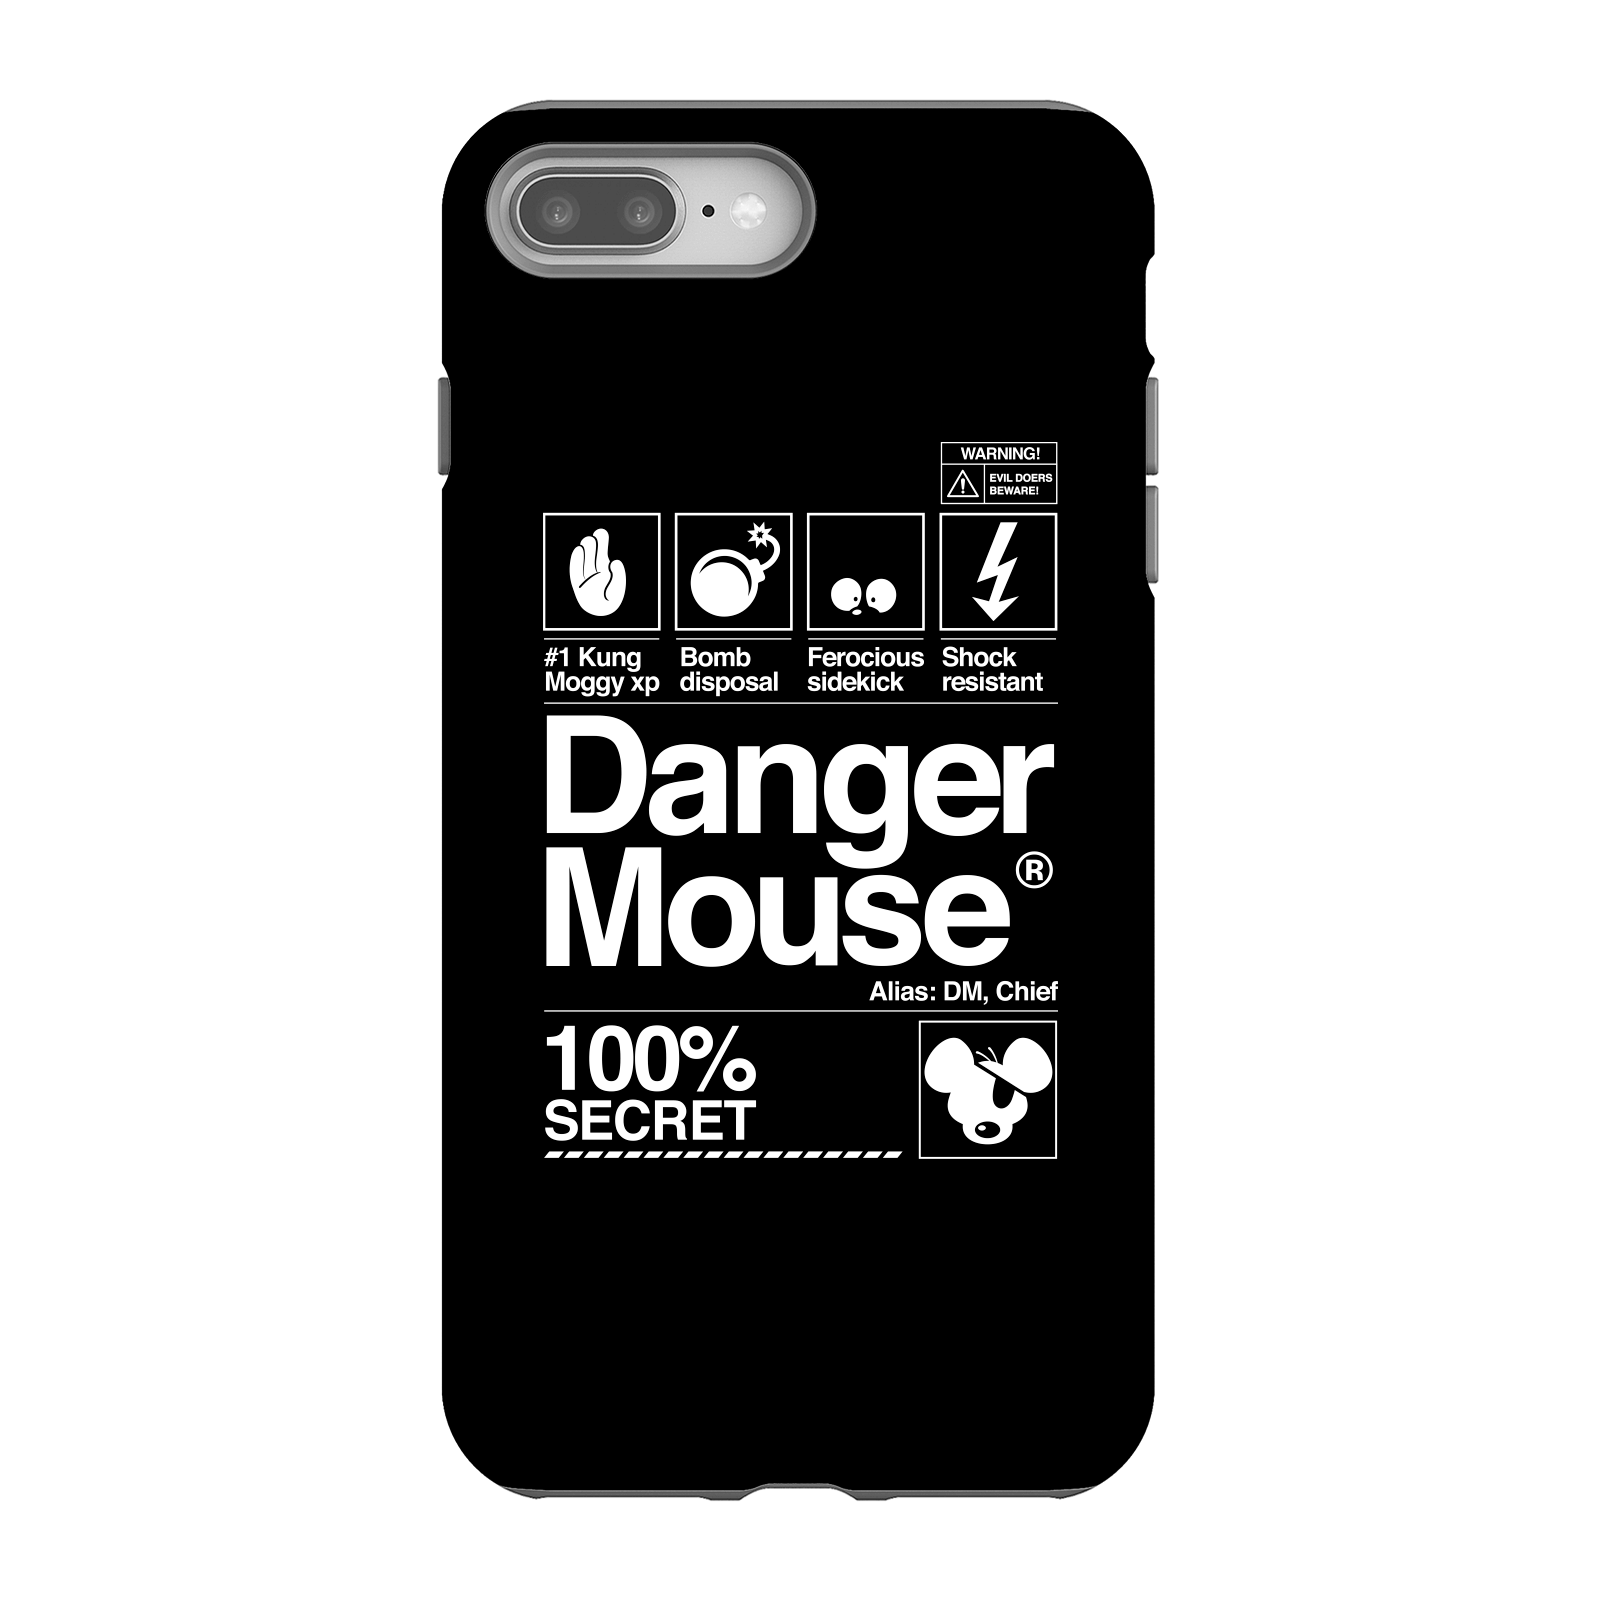 Danger Mouse 100% Secret Phone Case for iPhone and Android - iPhone 8 Plus - Tough Case - Matte